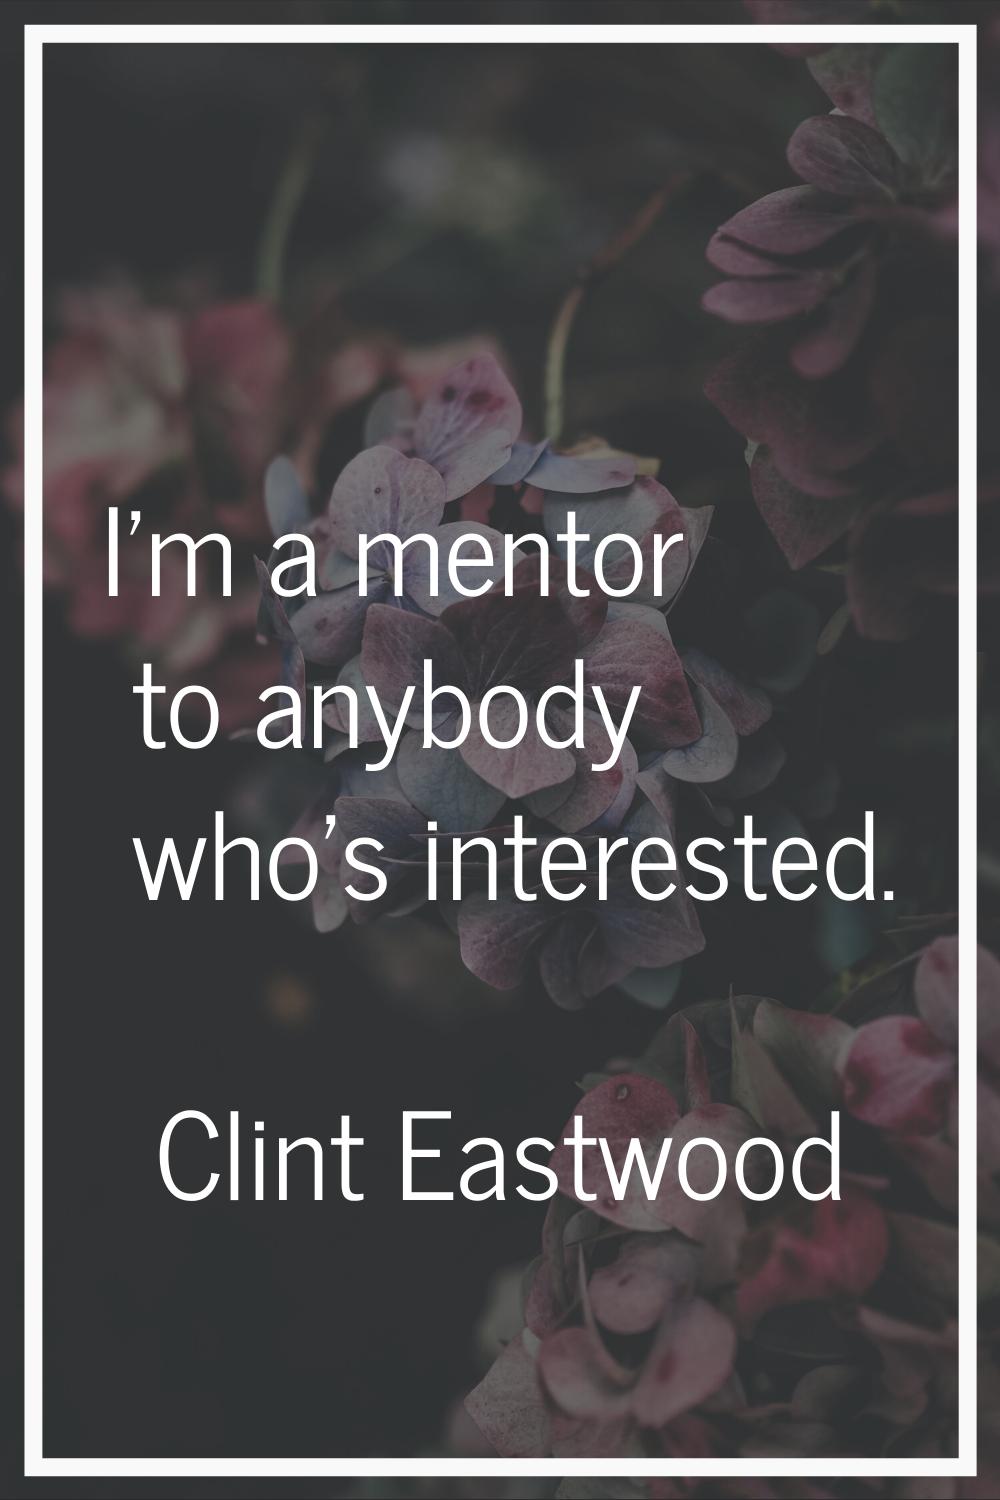 I'm a mentor to anybody who's interested.